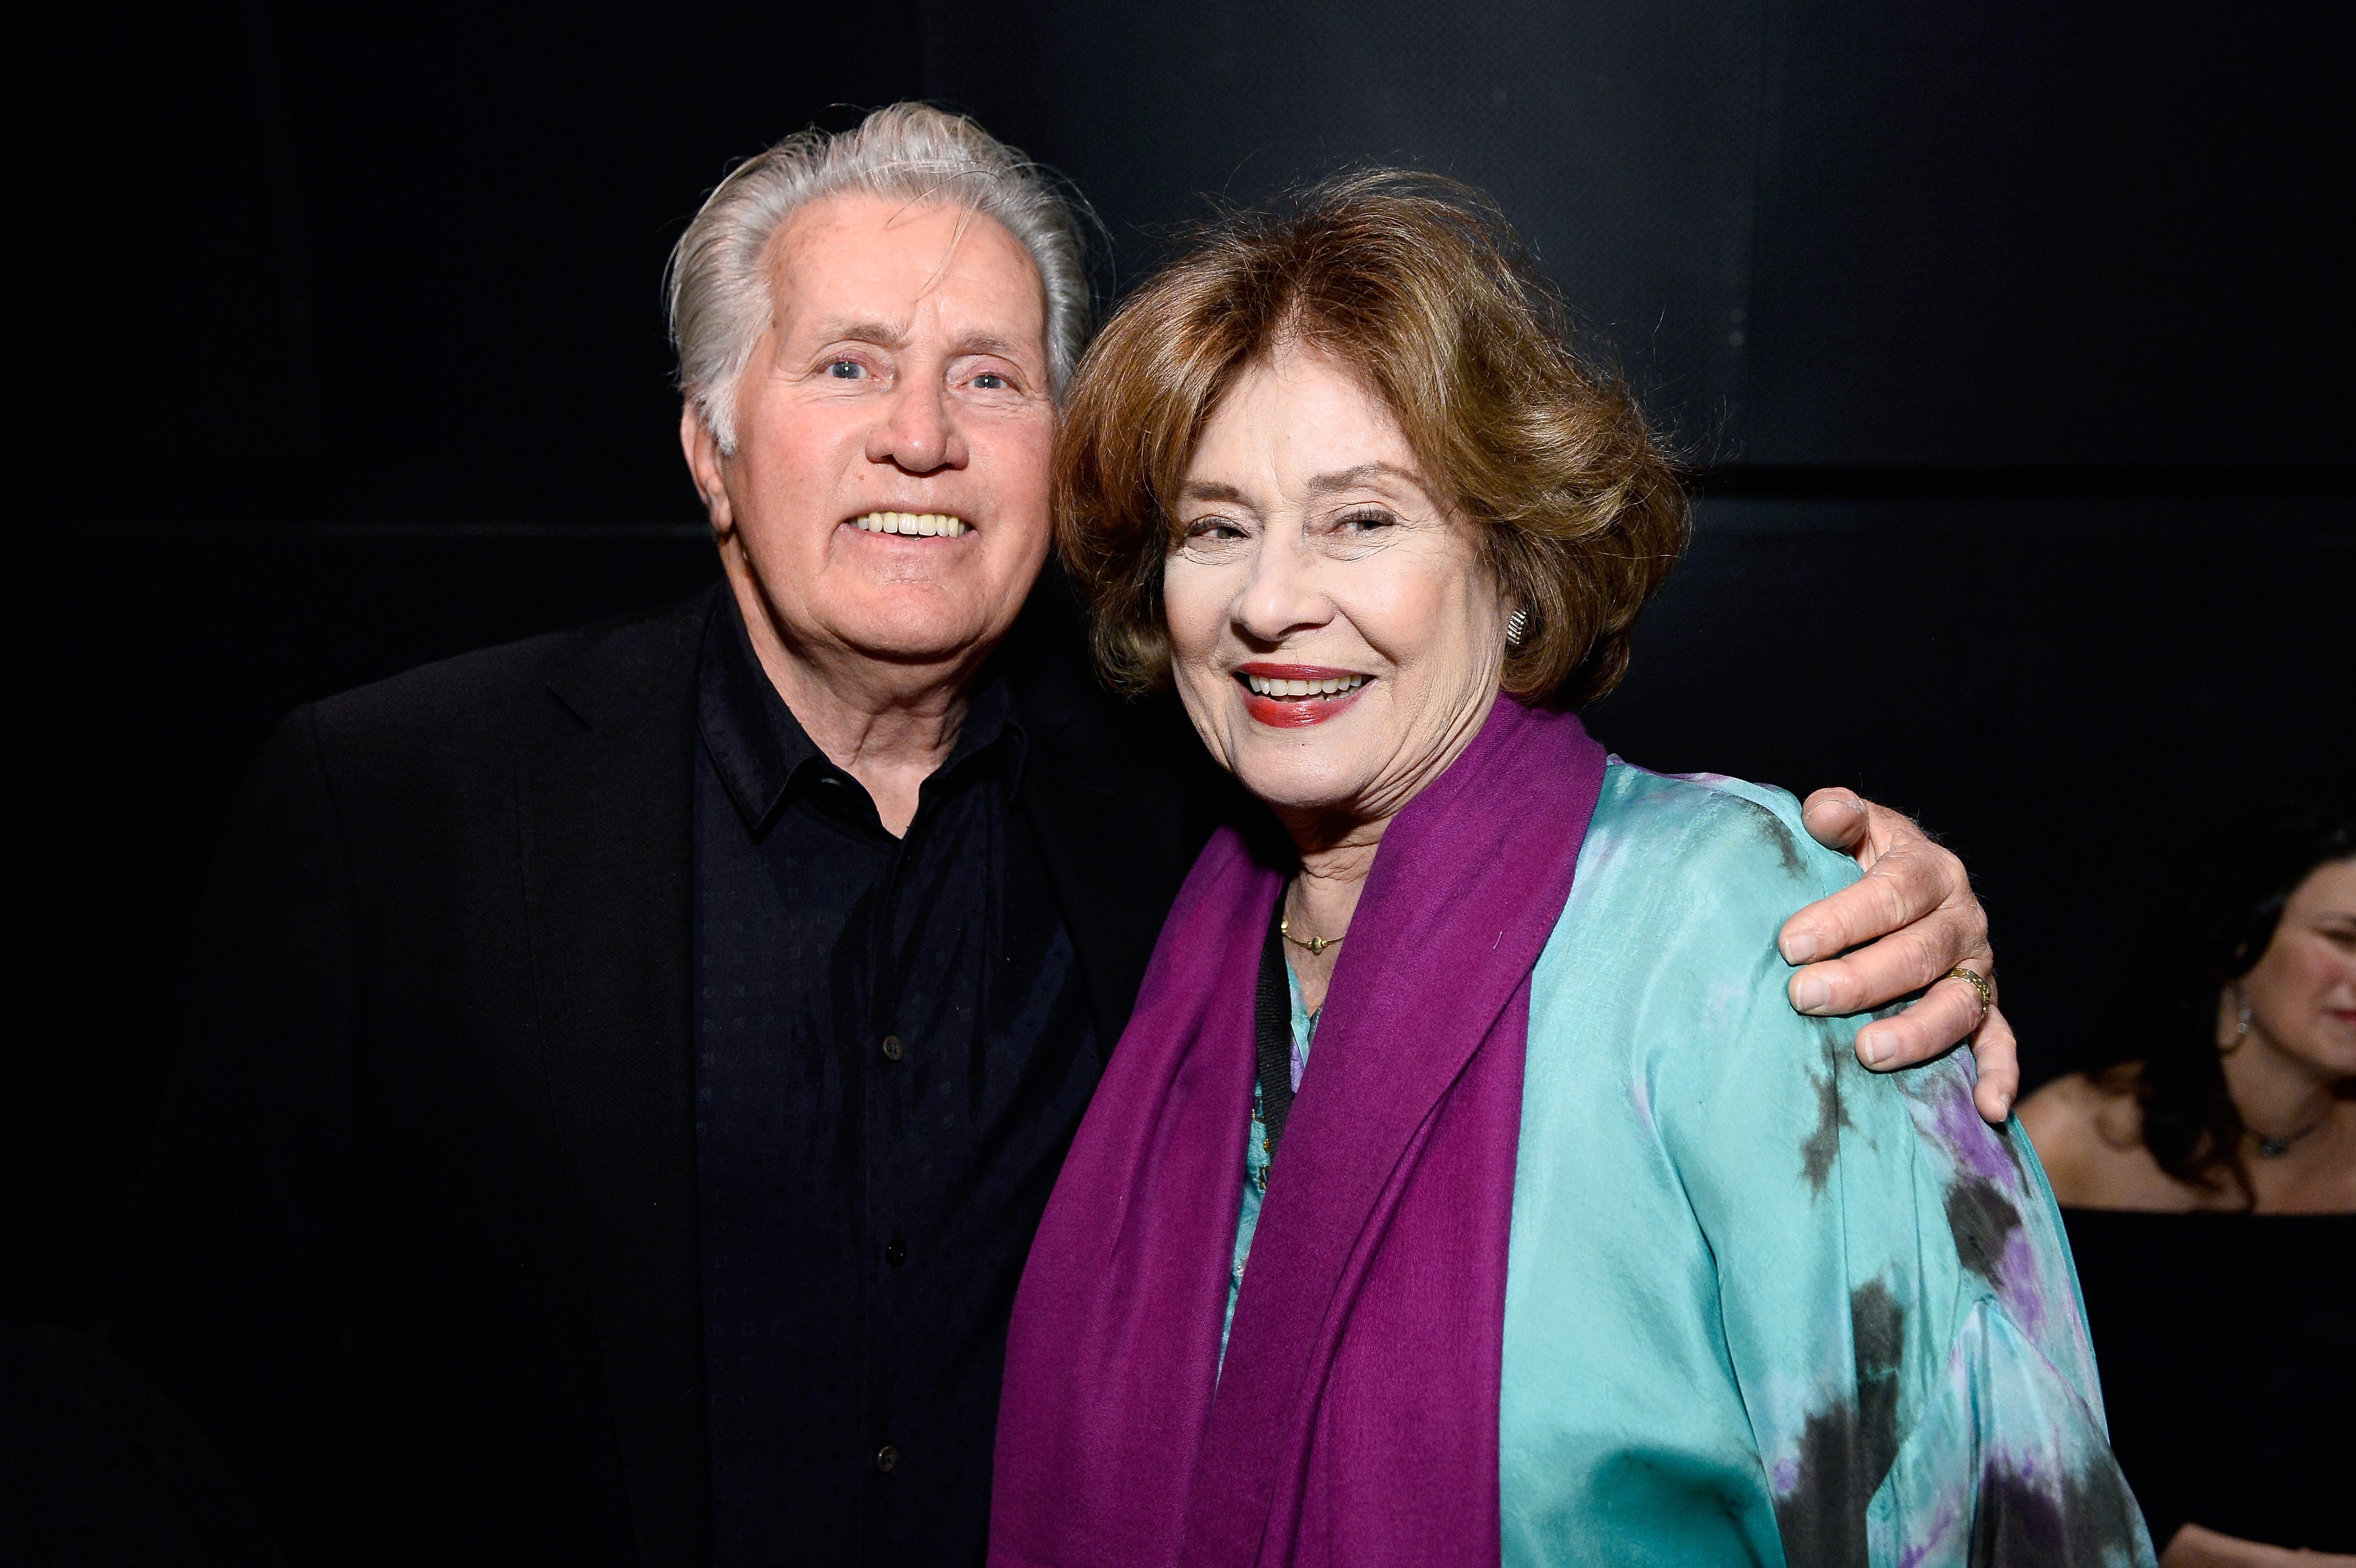 Actors Martin Sheen and Janet Sheen attend the screening of 'The Incident' during the 2017 TCM Classic Film Festival on April 8, 2017 in Los Angeles, California. | Source: Getty Images 